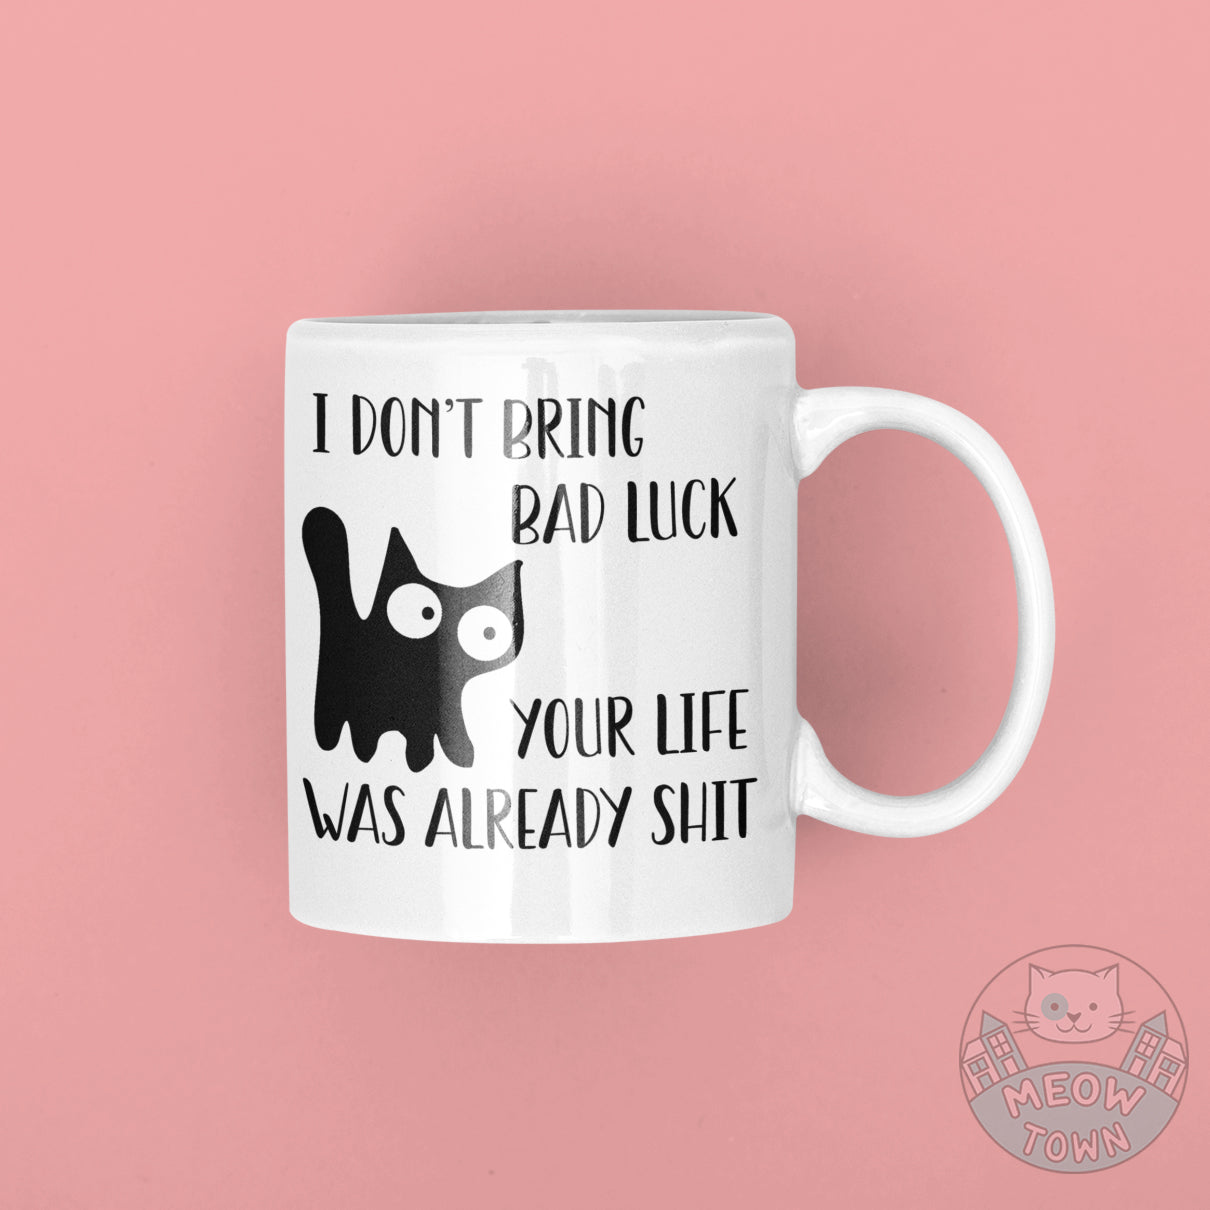 Funny Meow Town Special Print exclusively for black cat lovers. Spread the word: Black cats do not bring bad luck! These beautiful furballs can only make your life better:)